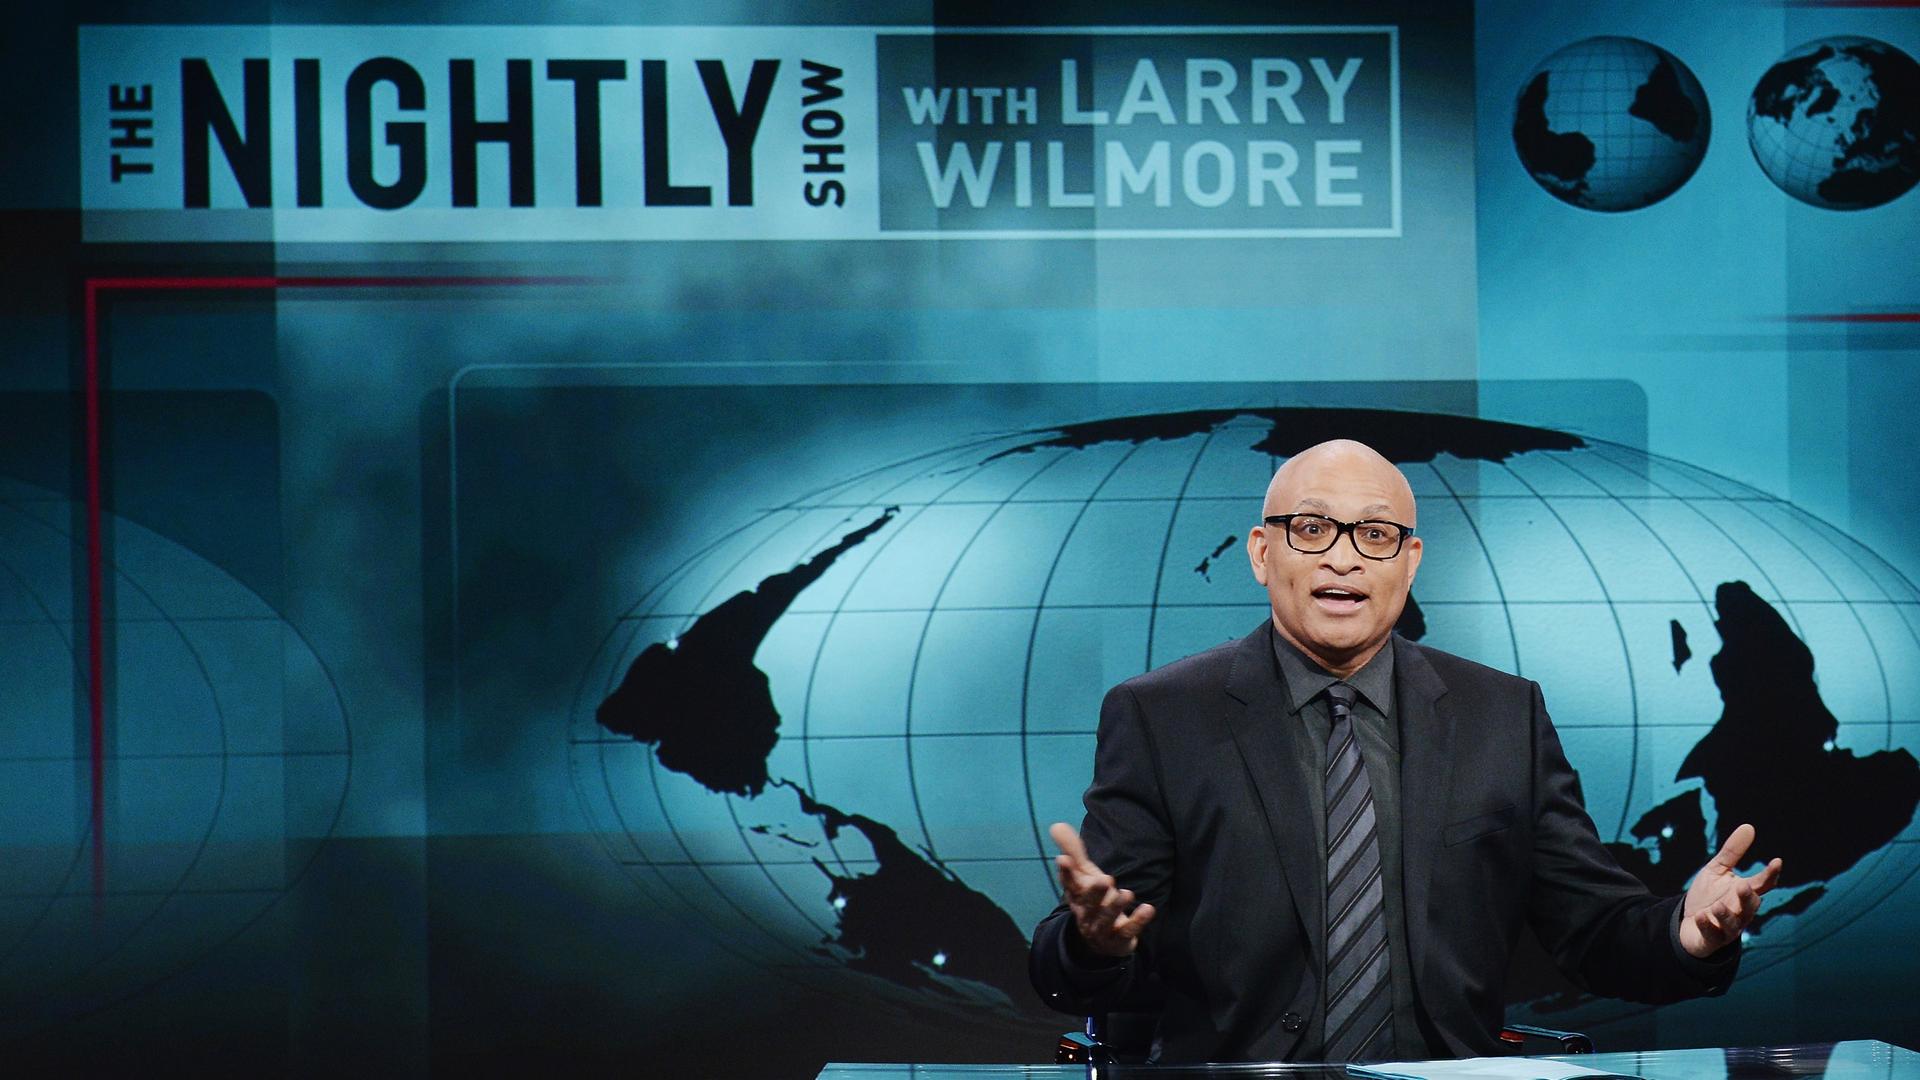 Larry Wilmore hosting "The Nightly Show with Larry Wilmore"